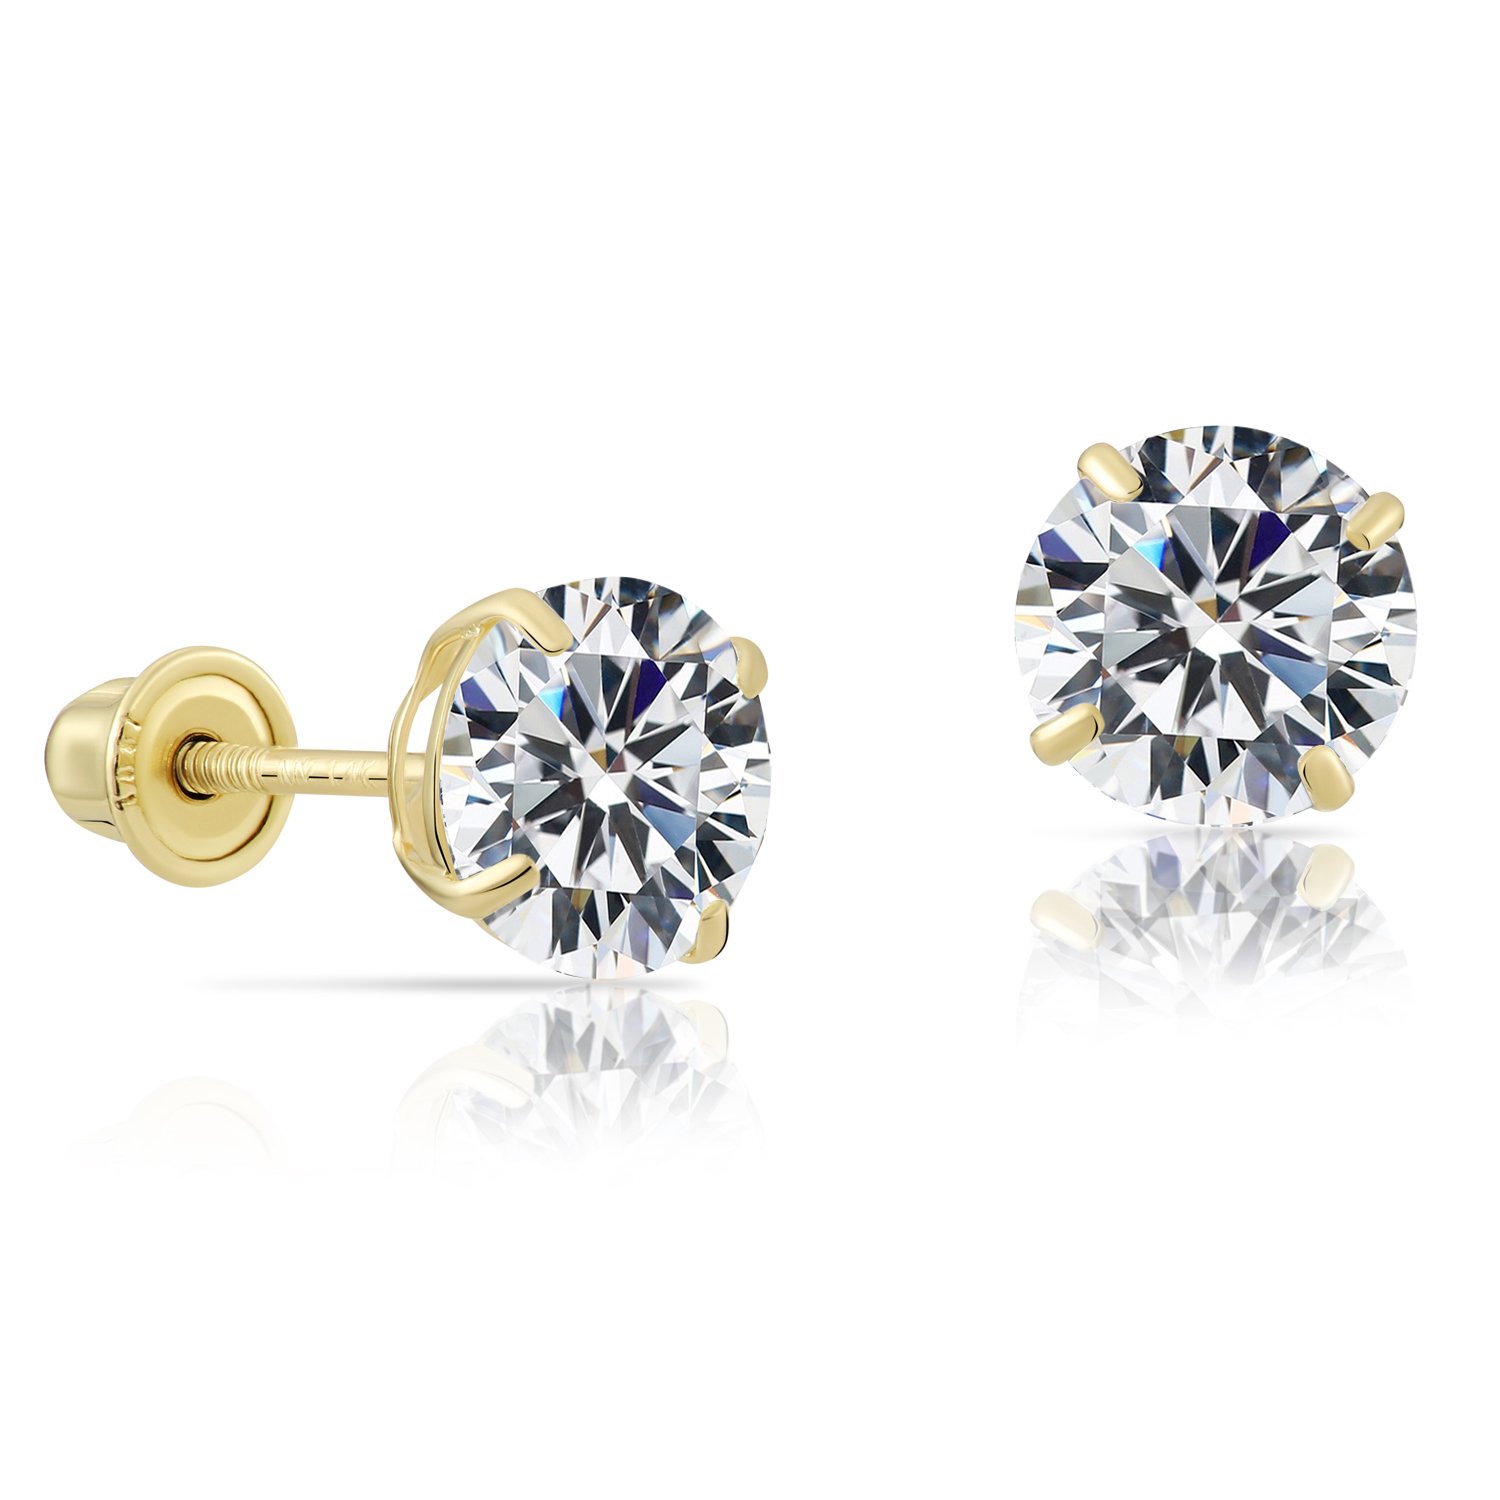 Tilo Jewelry 14k Yellow Gold Solitaire Round CZ Stud Post Earrings With Screw-Backs (7MM) - Women, Men, Unisex - image 1 of 8